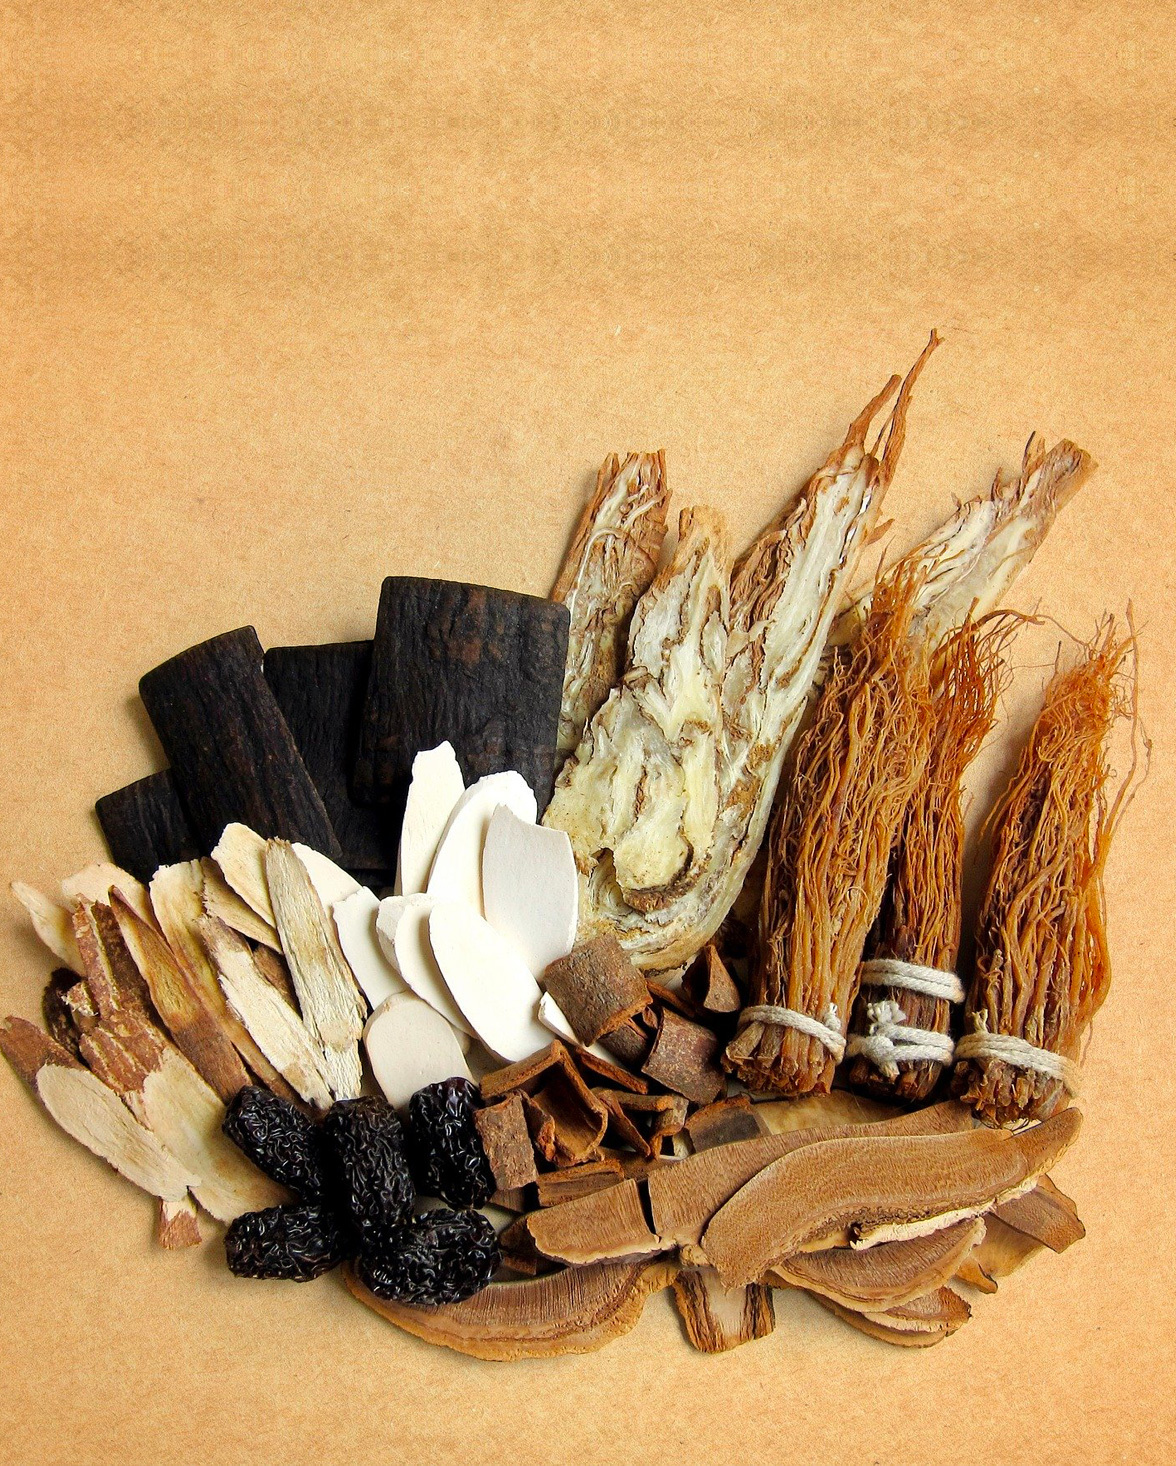 Chinese medicine extract filing products